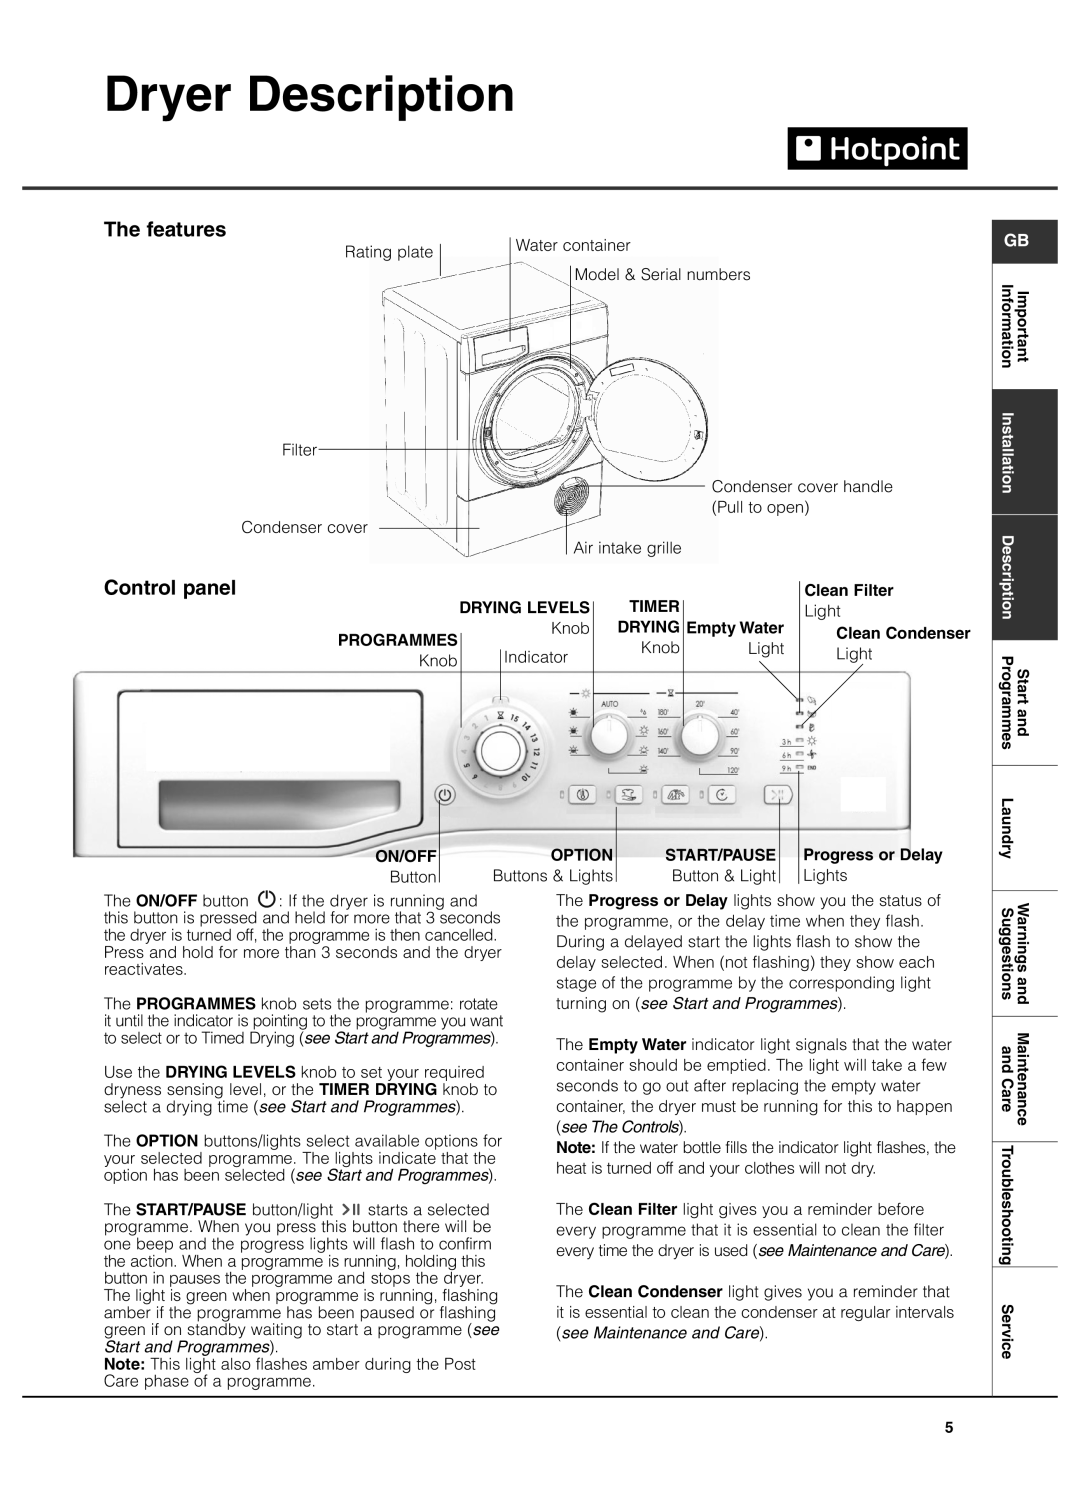 Hotpoint TCEl 87B Experience manual Dryer Description, The features, Control panel 